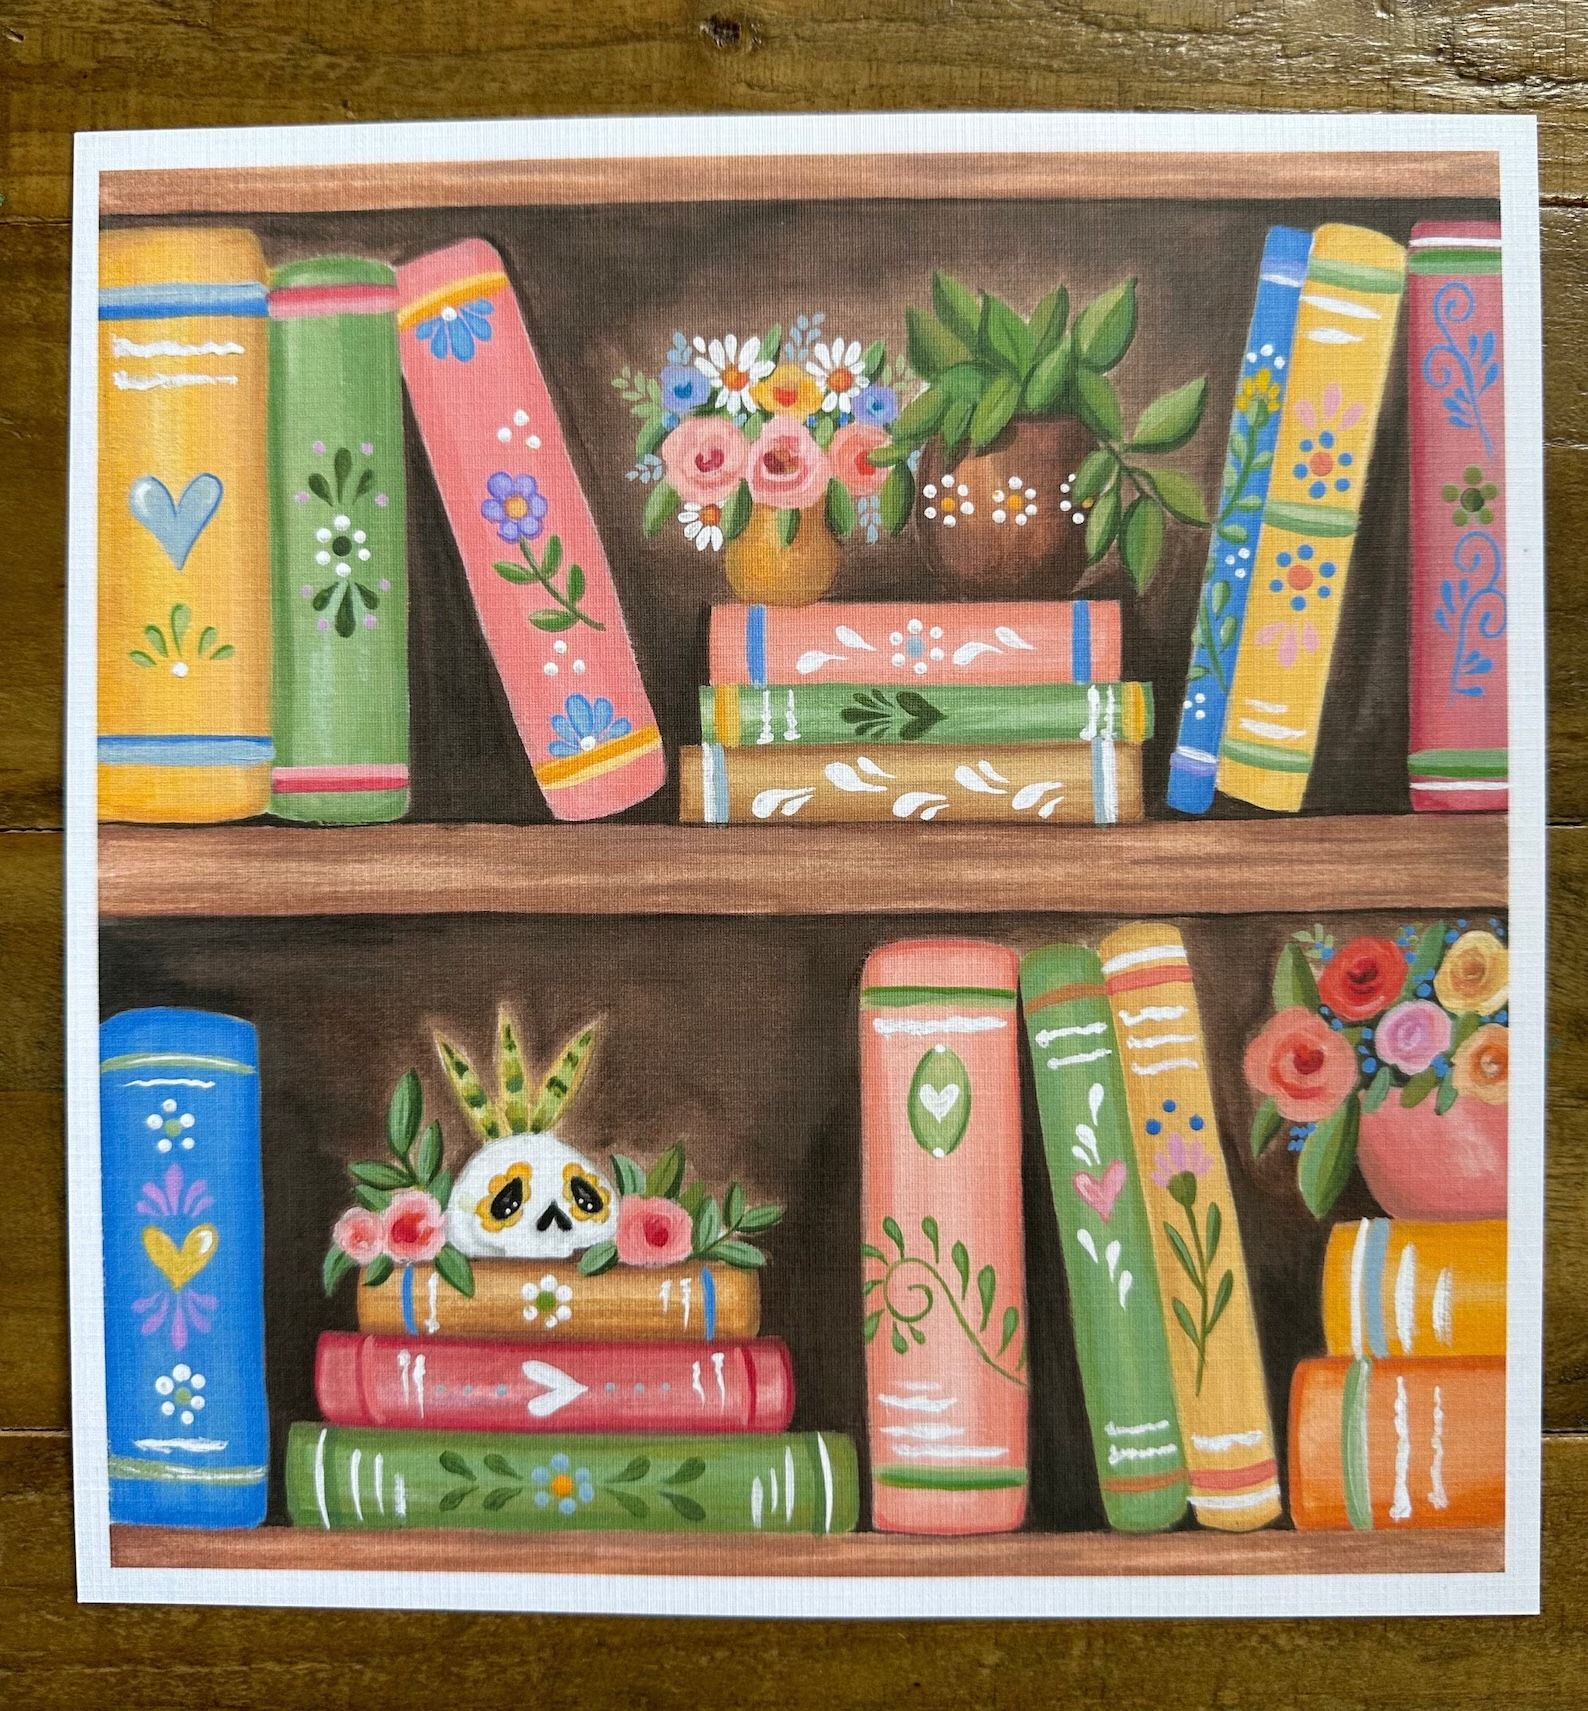 a print showing a bookshelf with several colorful books, succulents, and a painted skull 